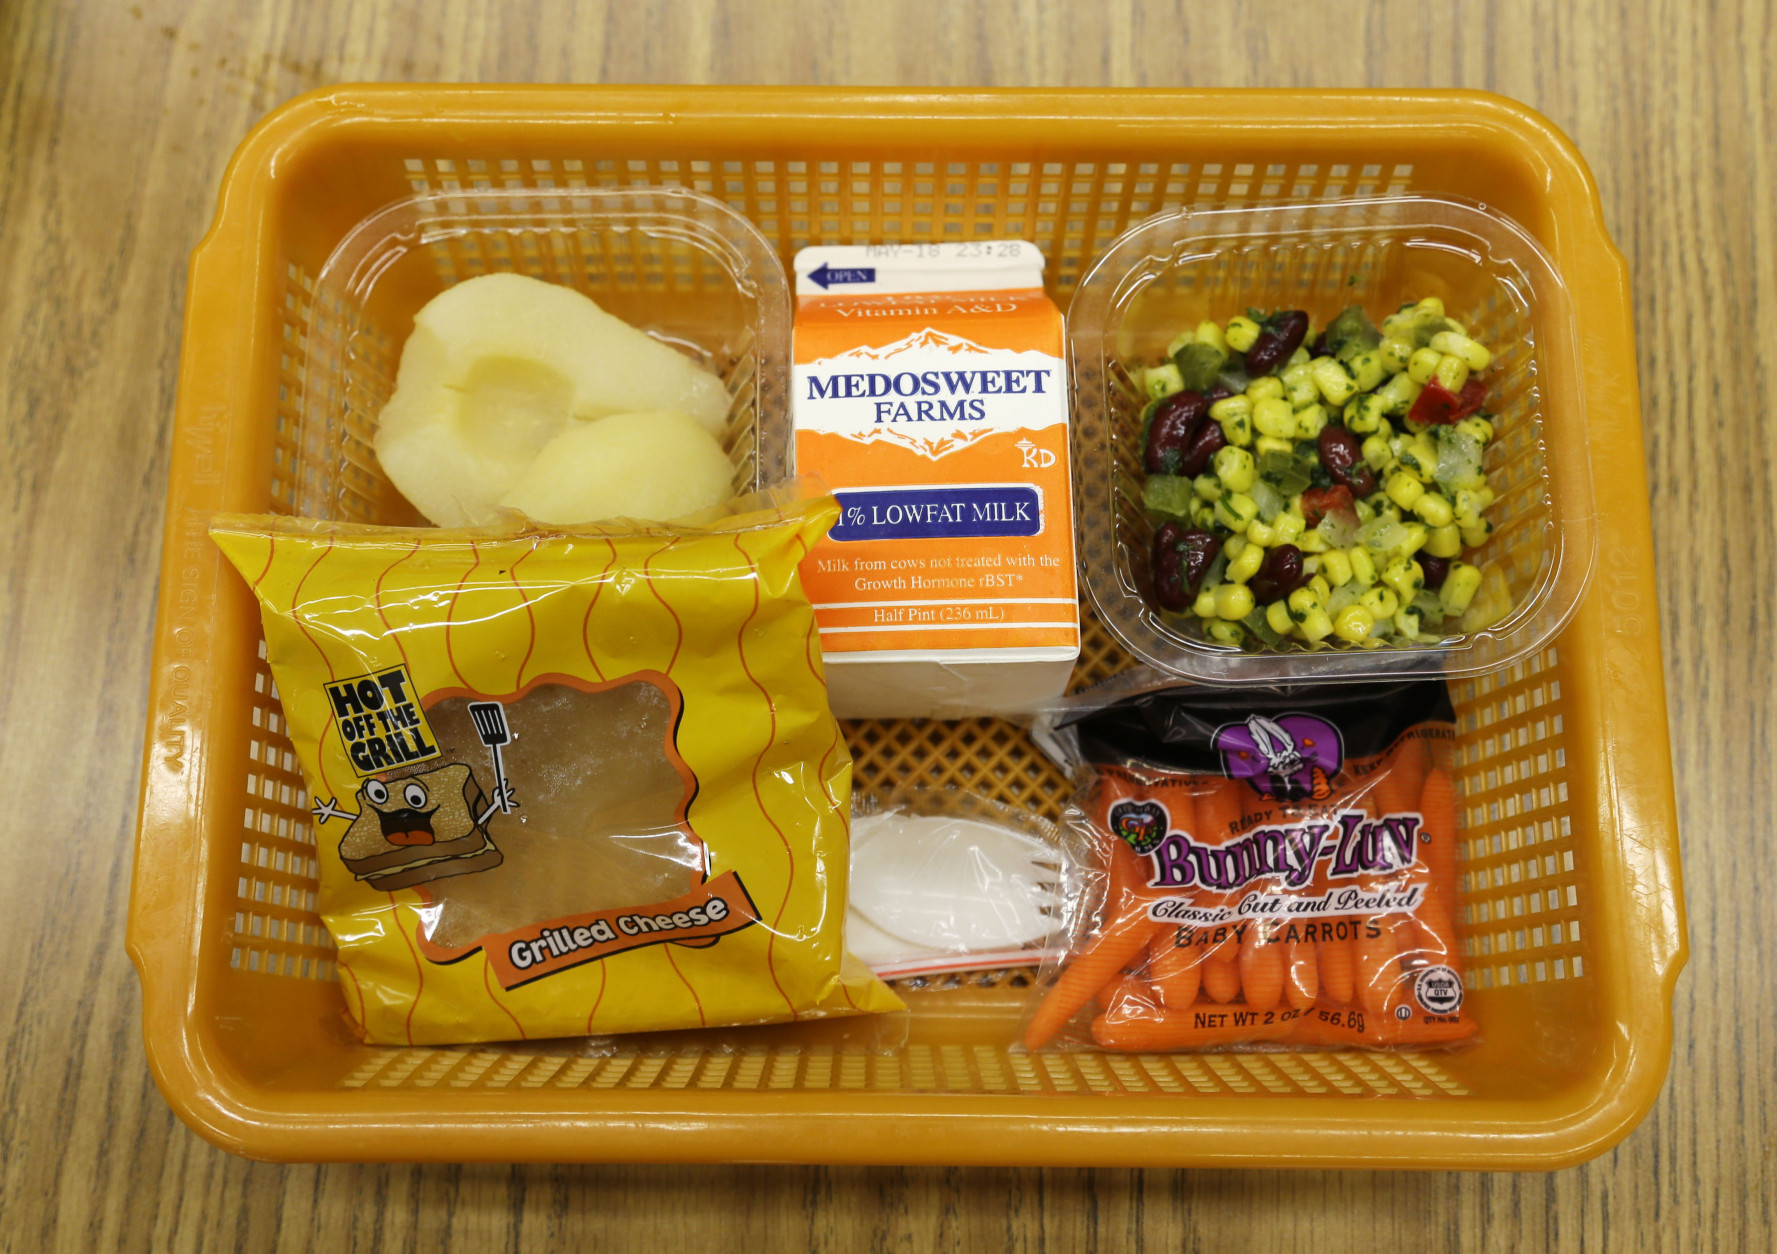 A school lunch featuring a grilled cheese sandwich on whole grain bread is served with a southwestern-style corn salad, fresh carrots and either canned pears or apple sauce Monday, May 5, 2014, at Mirror Lake Elementary School in Federal Way, Wash., south of Seattle. On this day, students could choose between this lunch or a green salad entree option featuring low-sodium chicken, a whole-grain roll, fresh red peppers, and cilantro dressing. (AP Photo/Ted S. Warren)